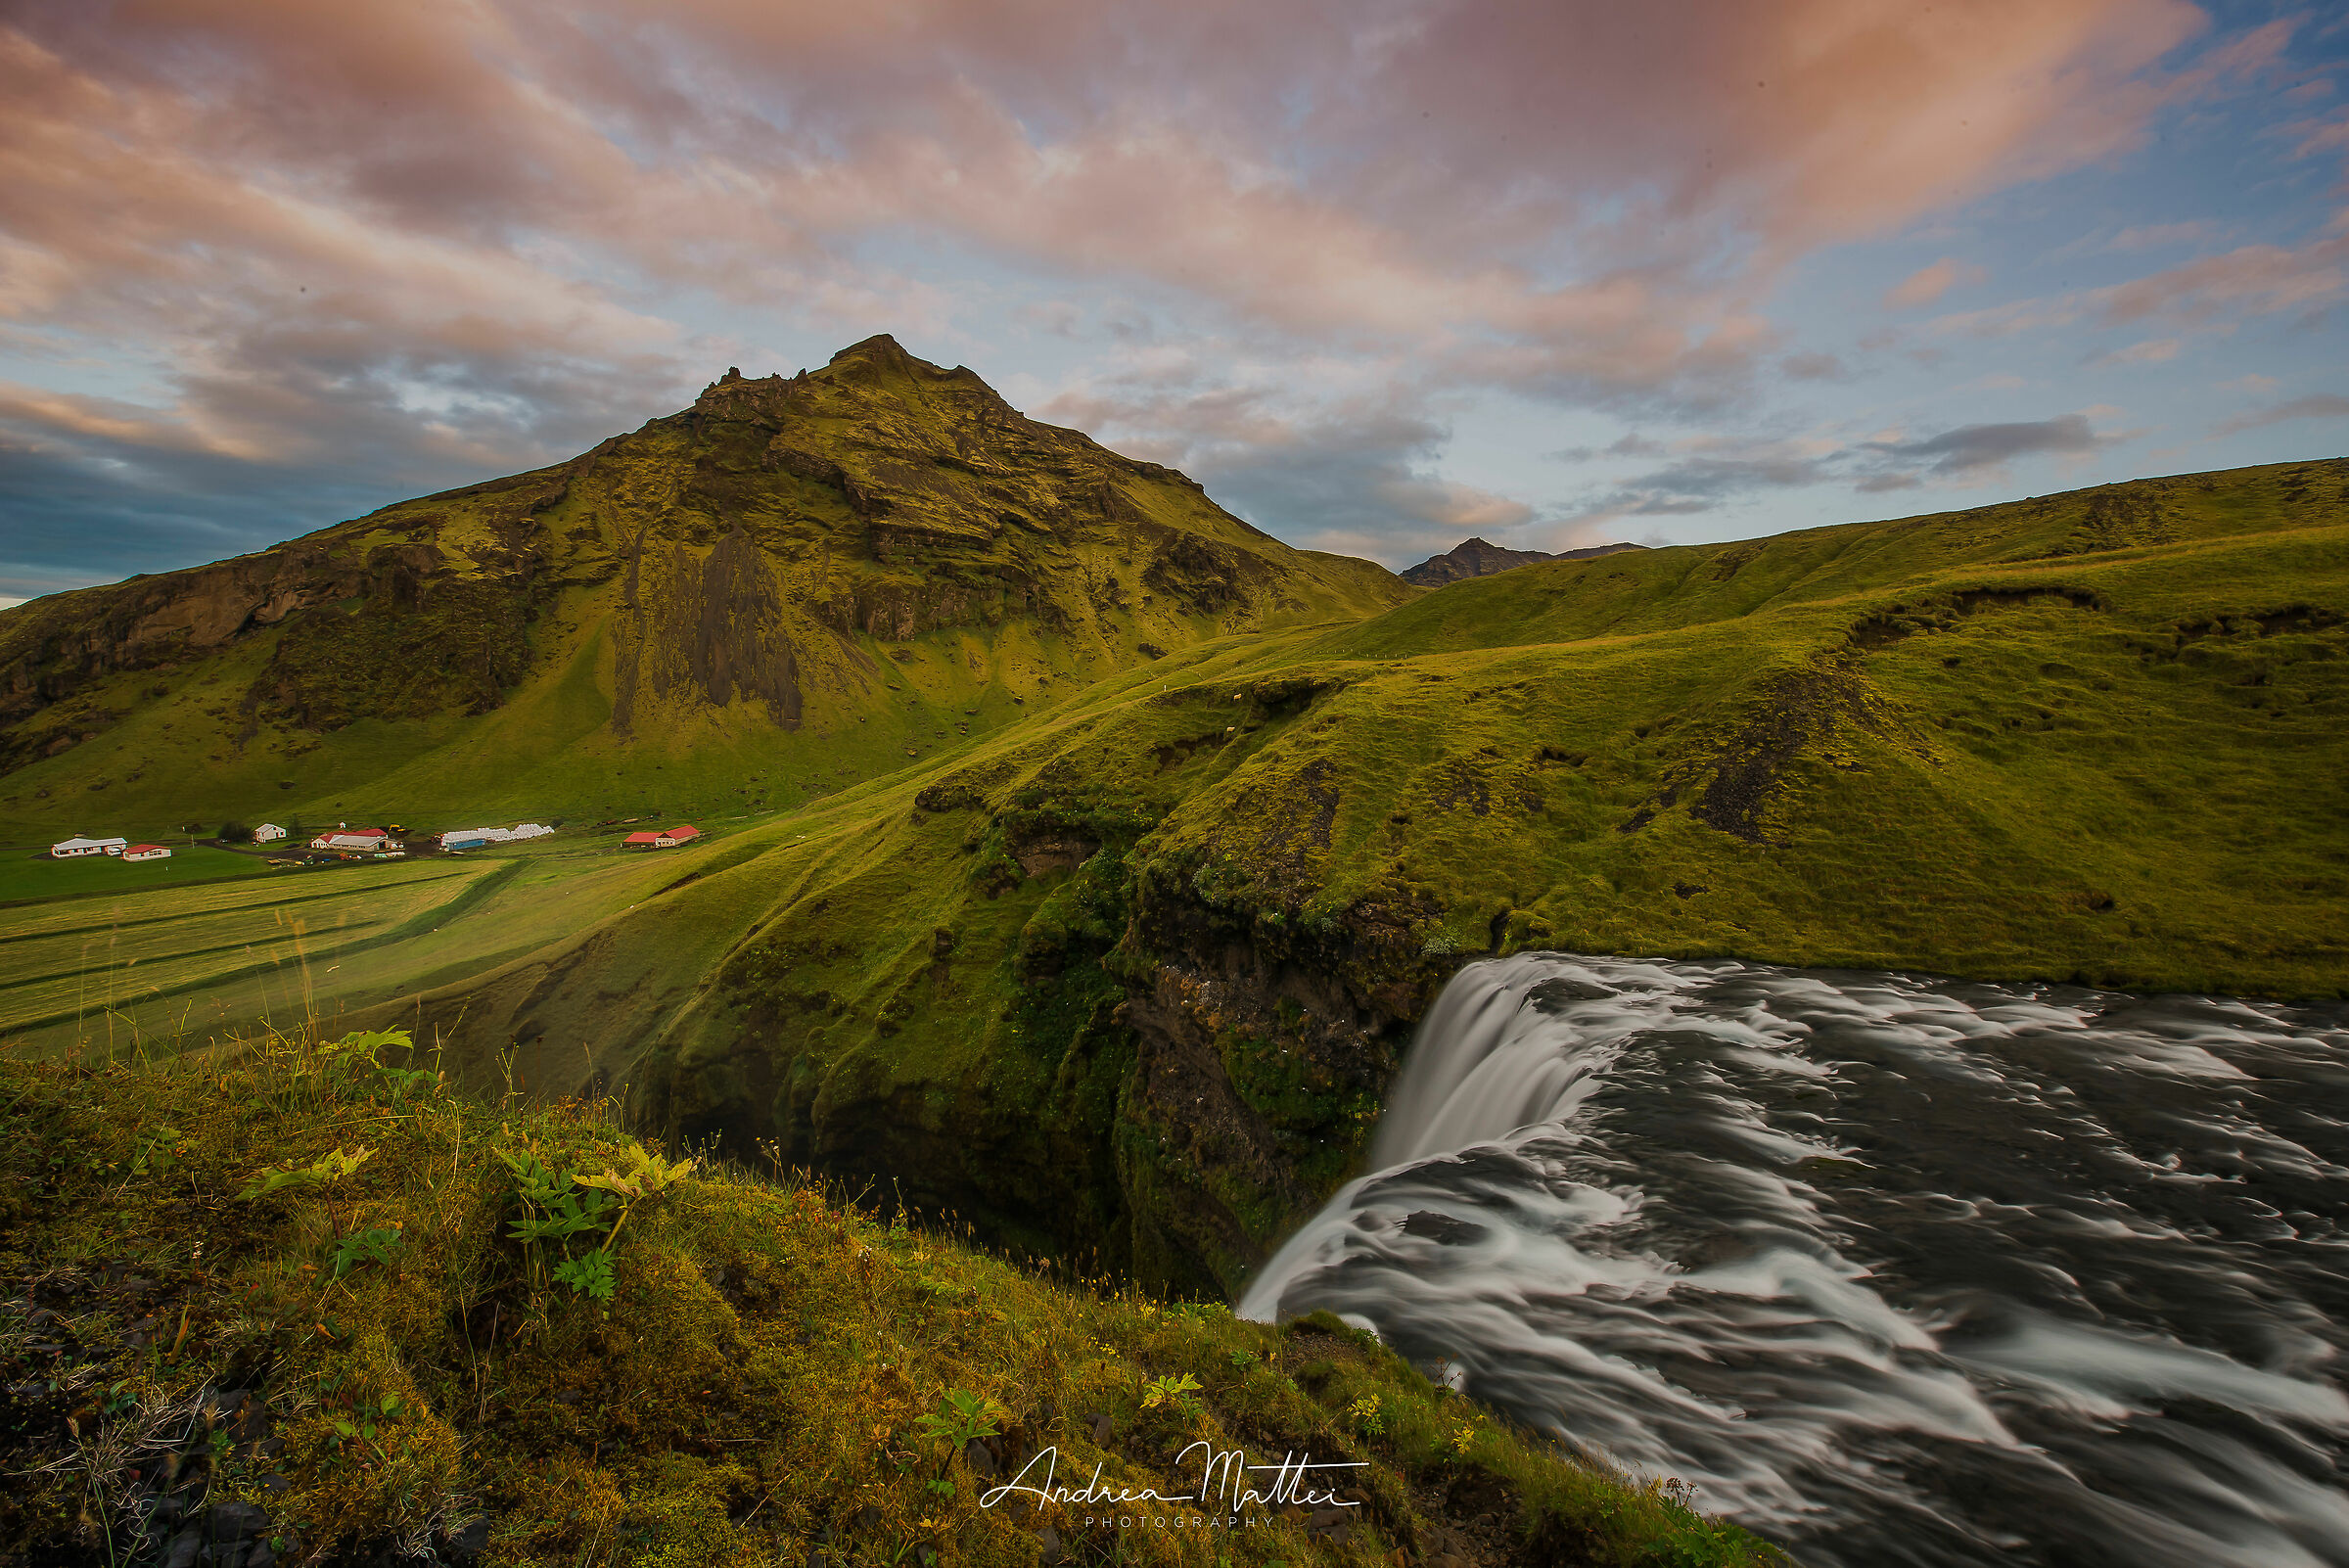 Sk'gafoss right after the storm...